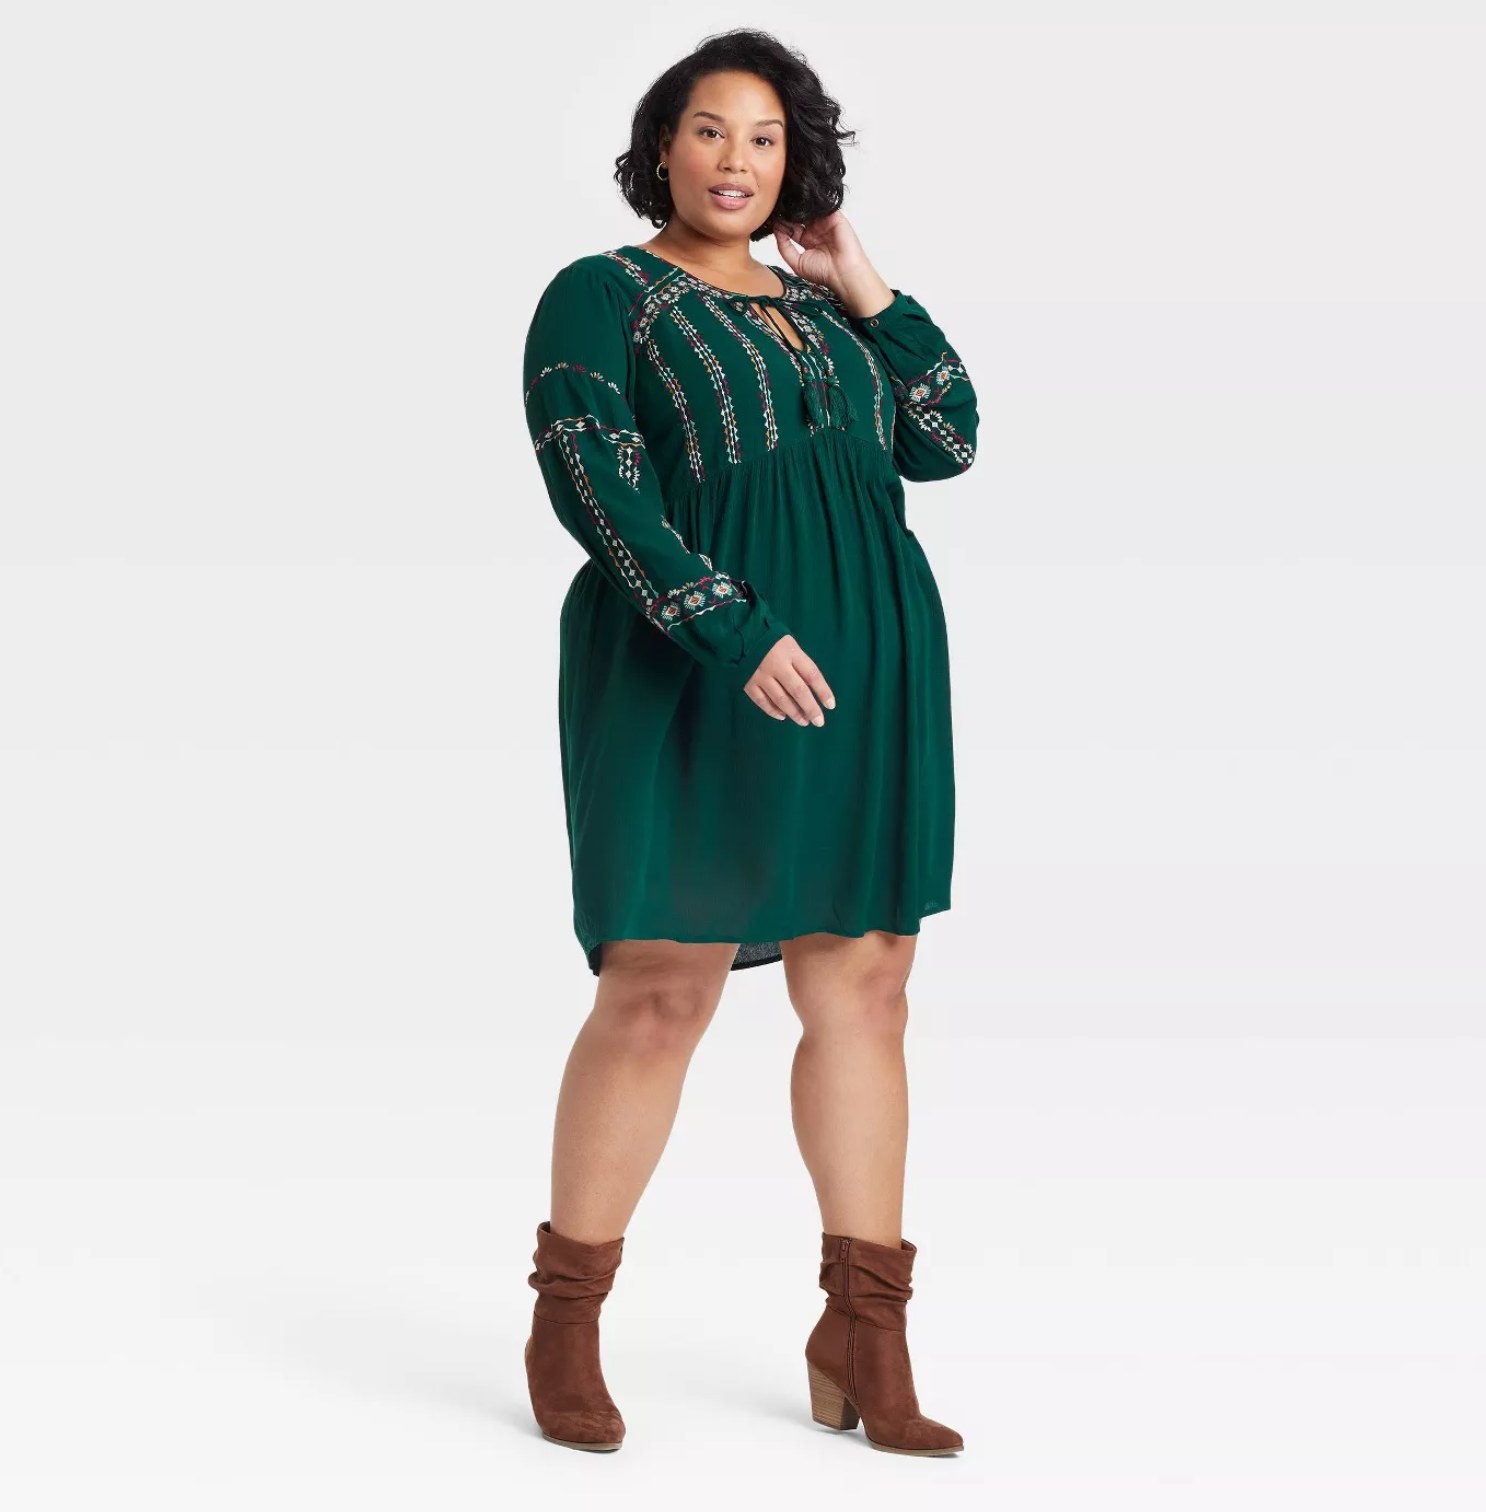 model wearing the dress in green with an embroidered top and brown ankle booties